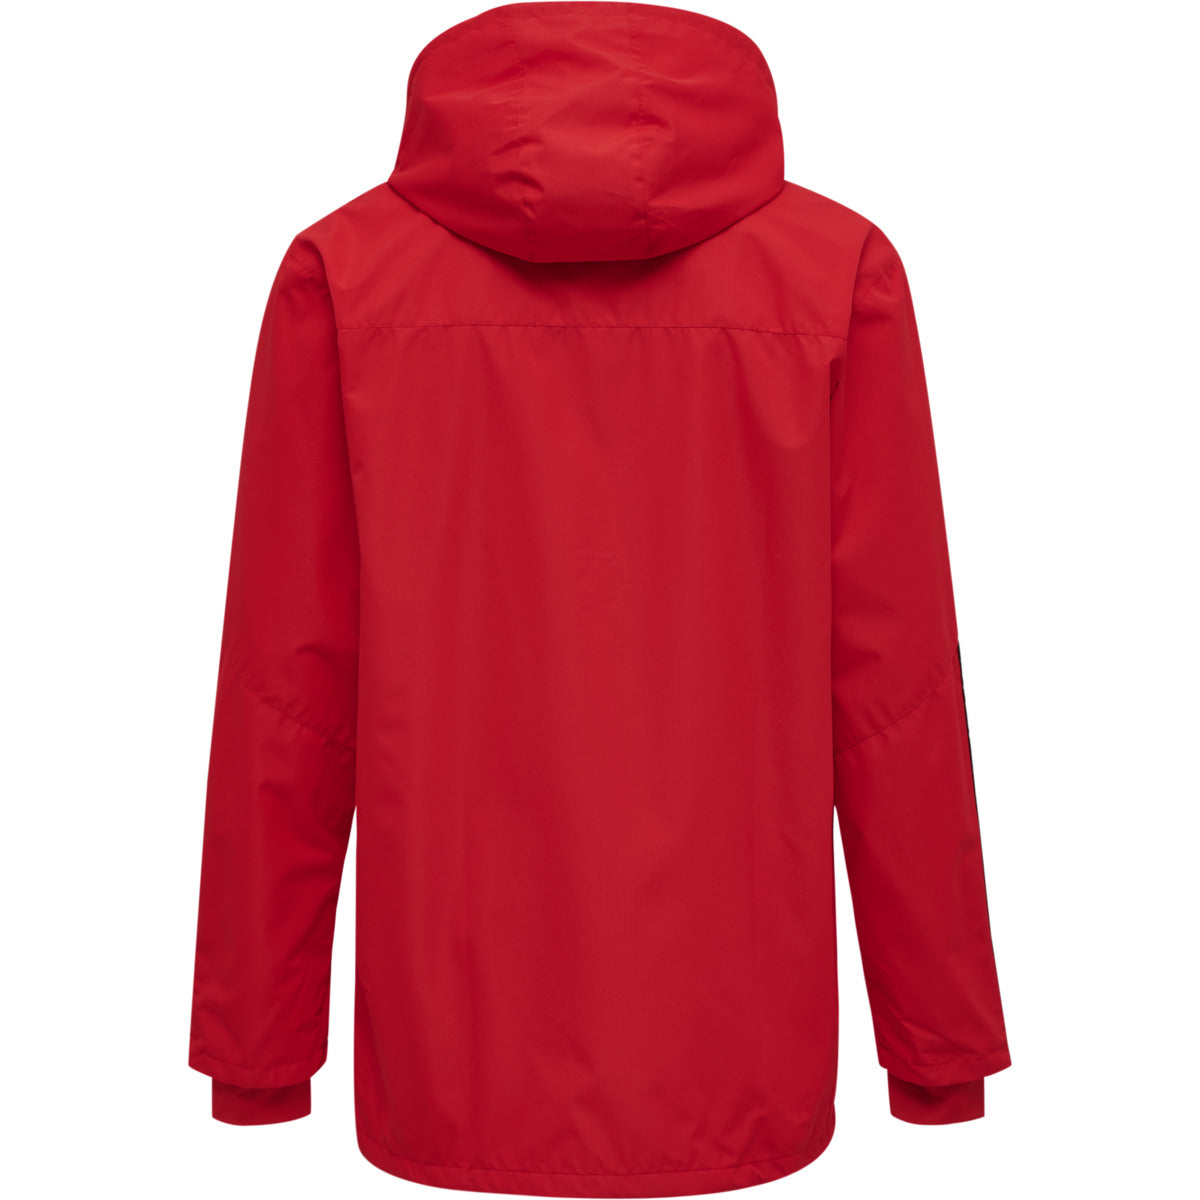 hmlAUTHENTIC KIDS ALL-WEATHER JACKET TRUE RED